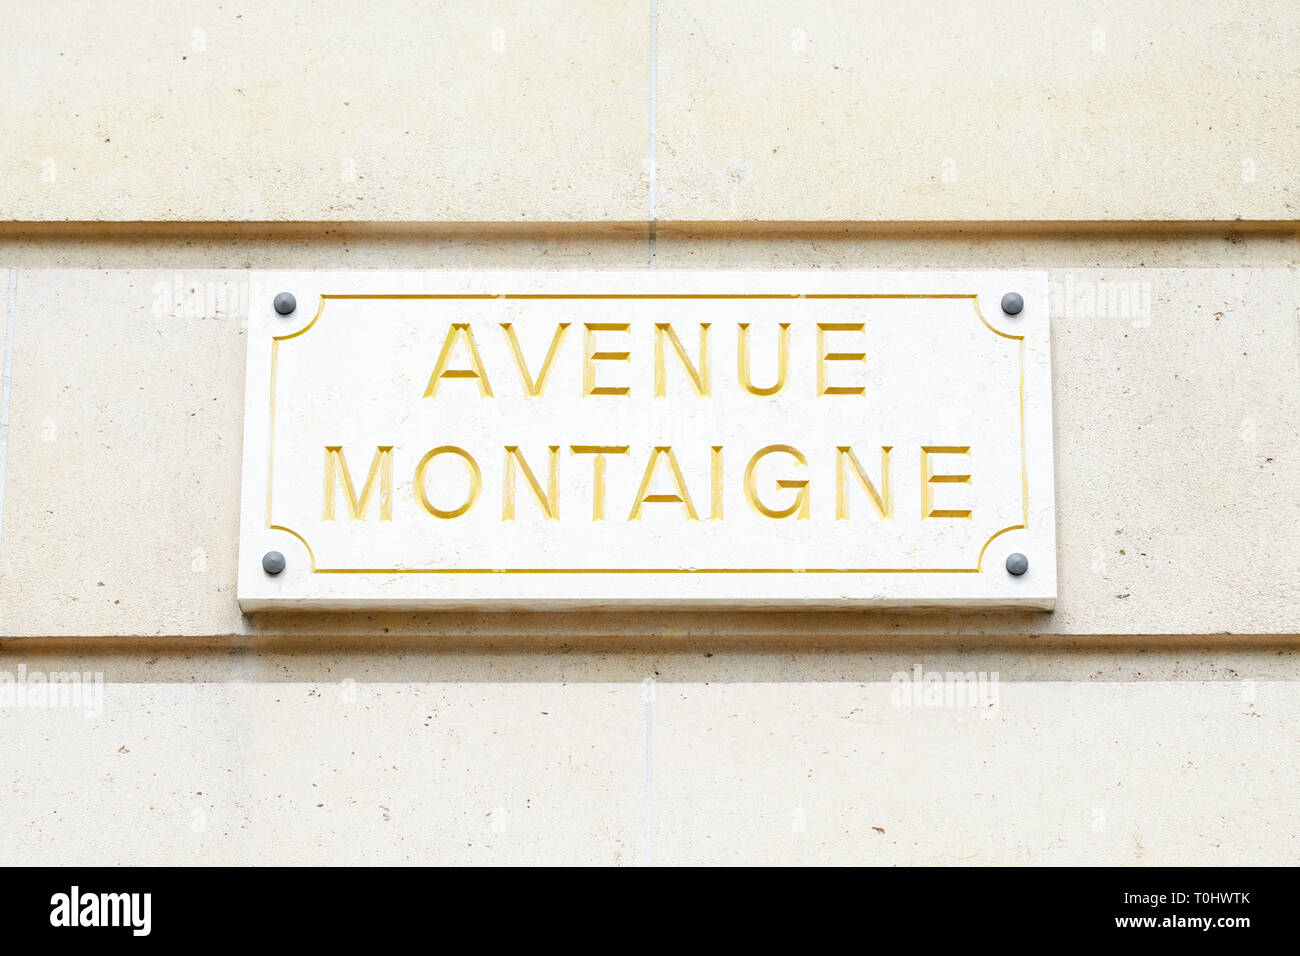 Read the Signs: Avenue Montaigne - France Today